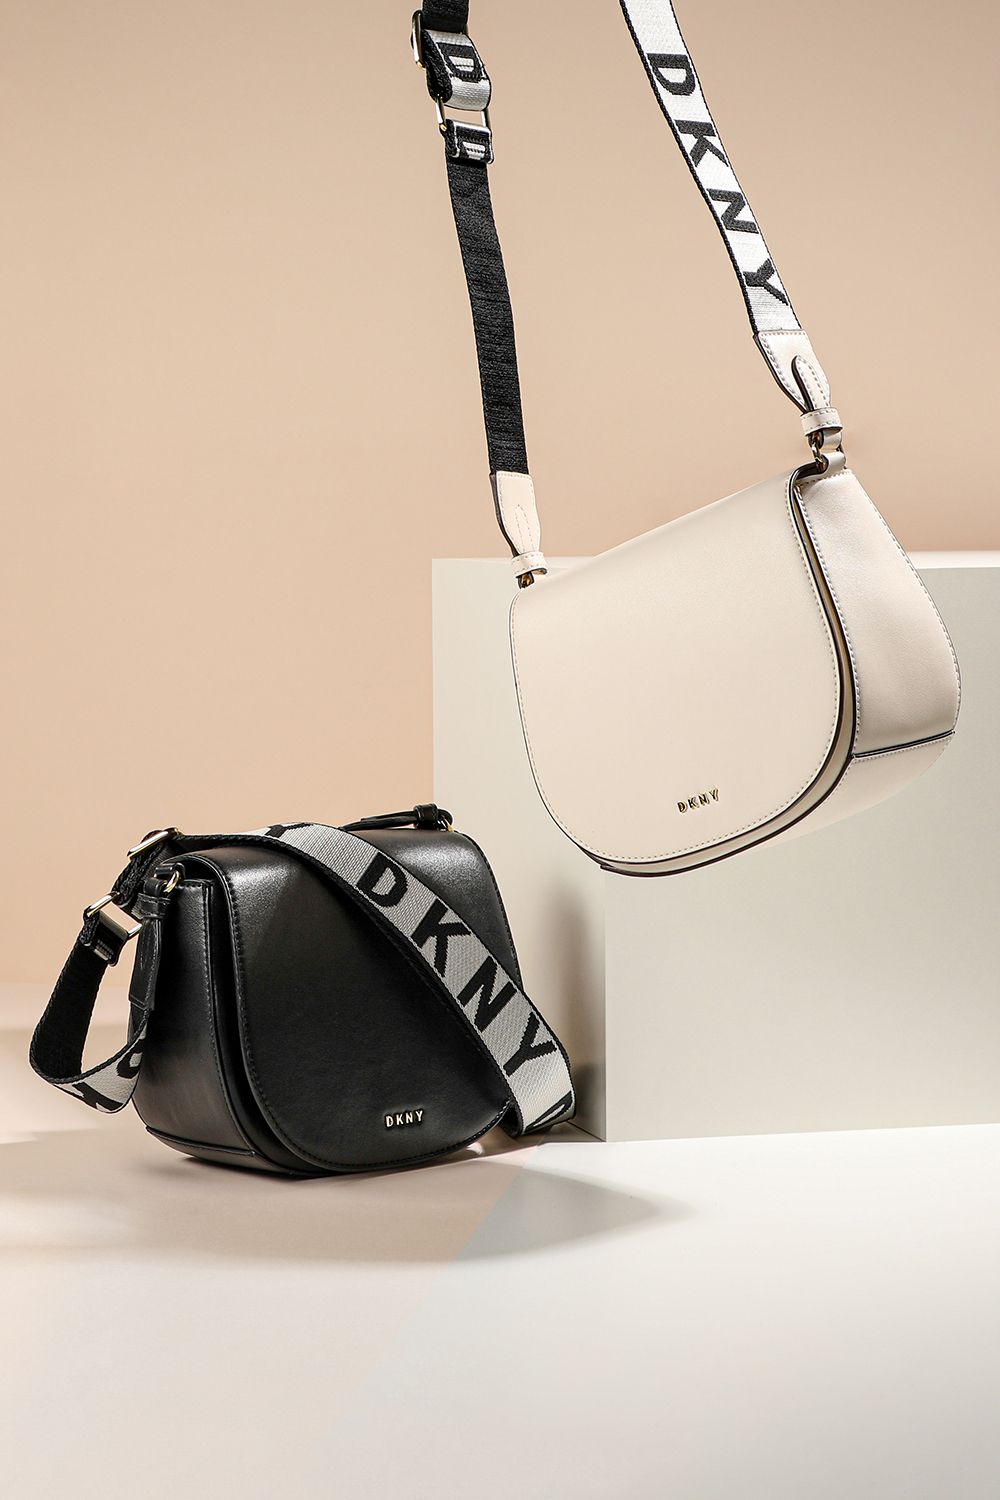 Urban Chic: DKNY Bags for Effortless Style on the Go